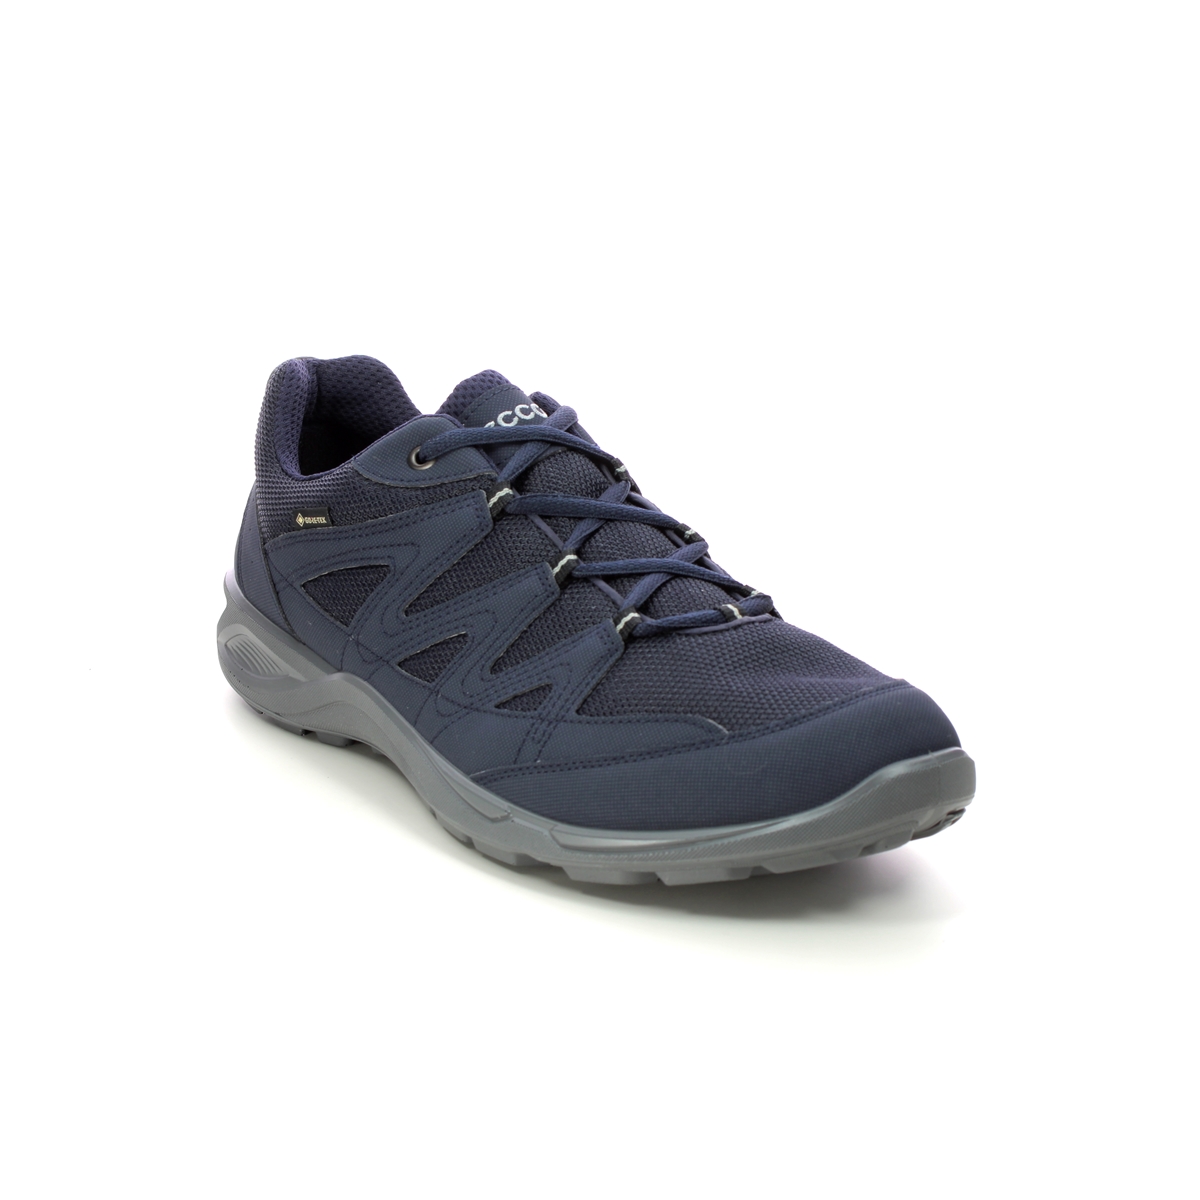 Ecco Terracruise Light Gtx Mens Navy Mens Trainers 825784-50769 In Size 40 In Plain Navy